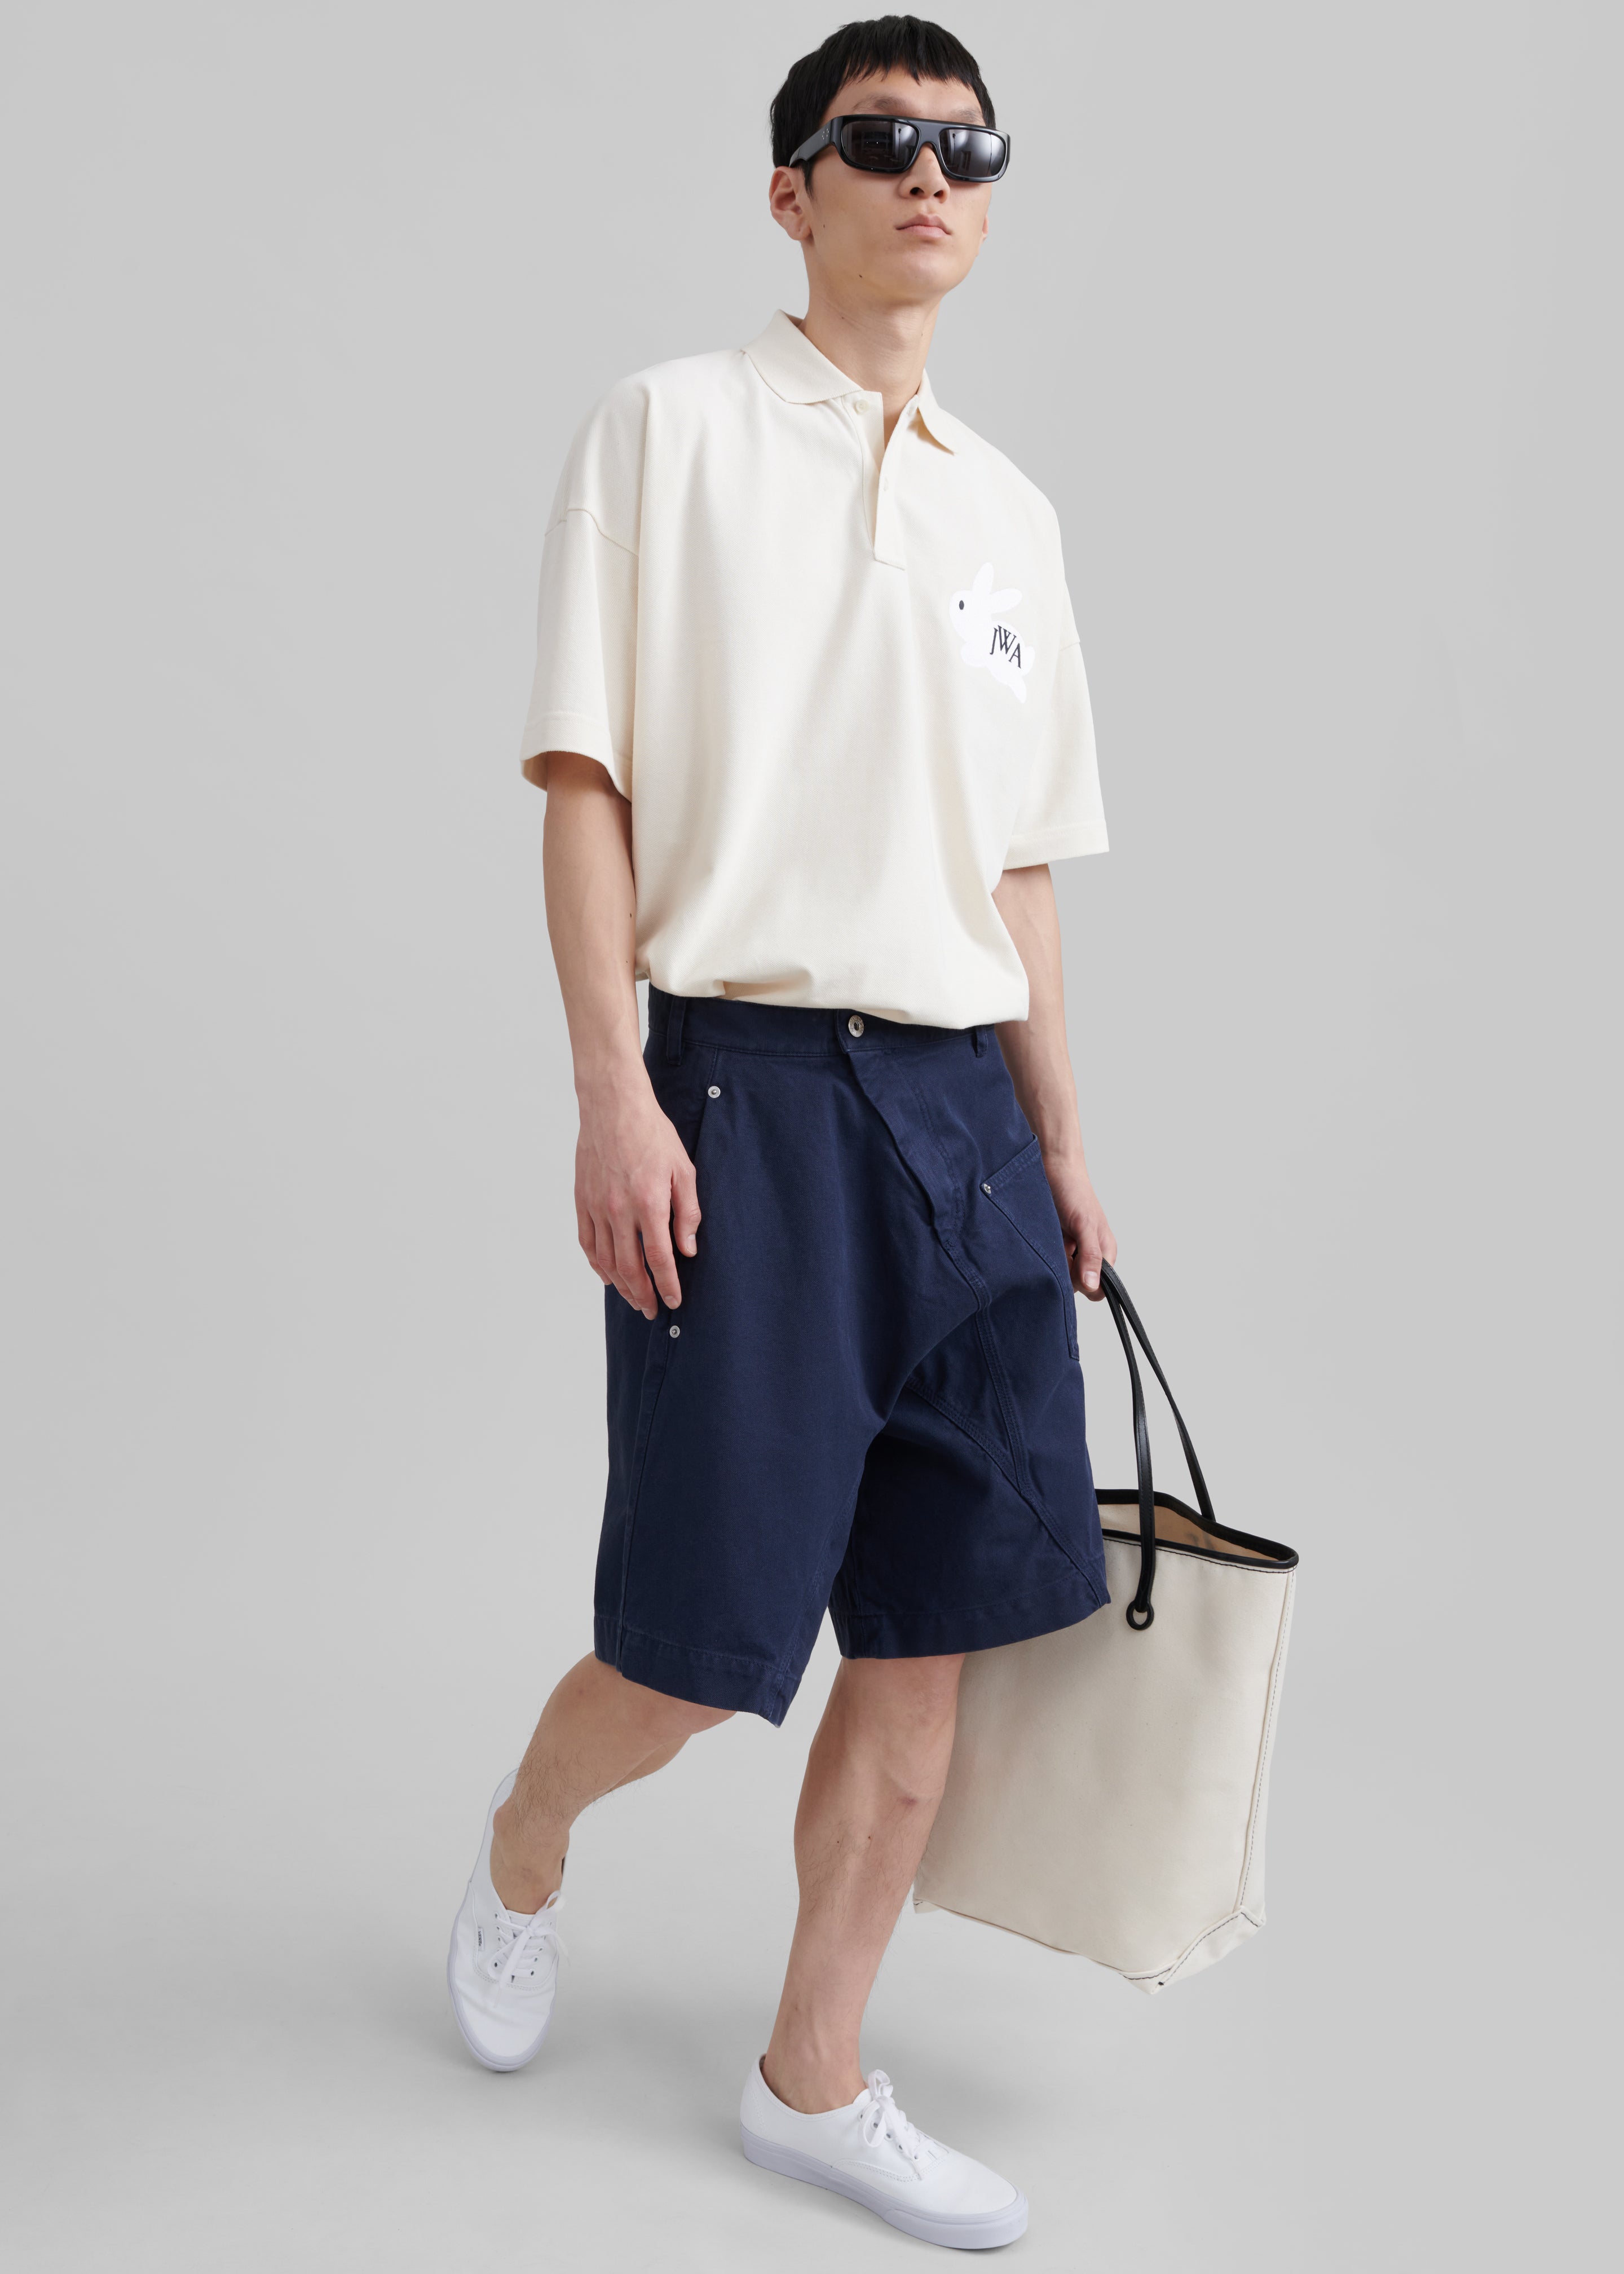 JW Anderson Twisted Shorts - Navy - 4